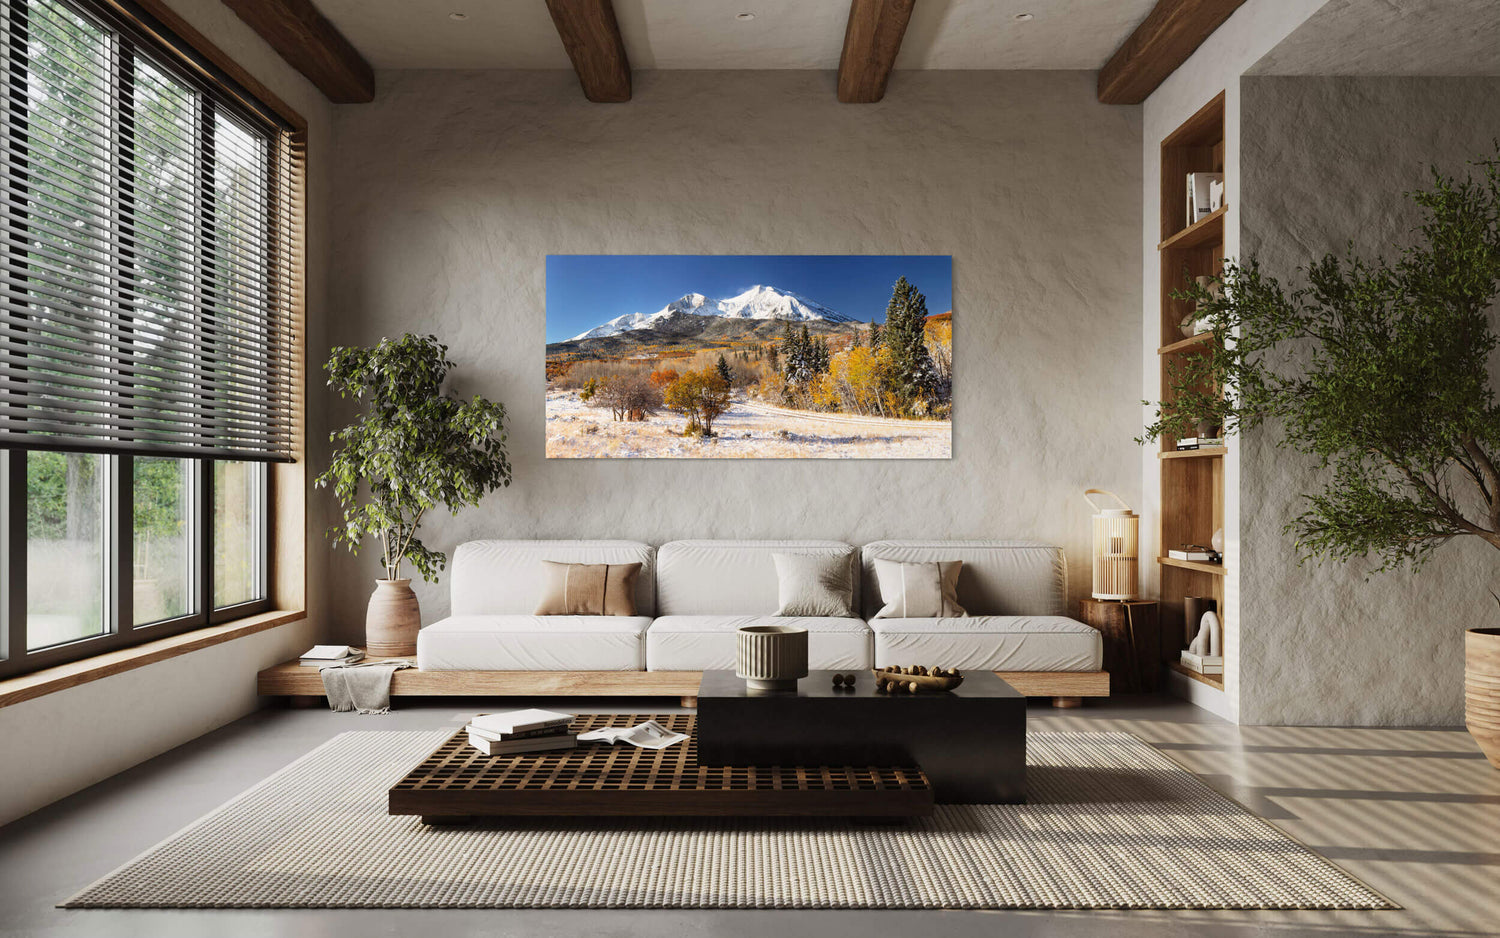 A piece of Colorado art showing Mount Sopris in Carbondale in fall hangs in a living room.